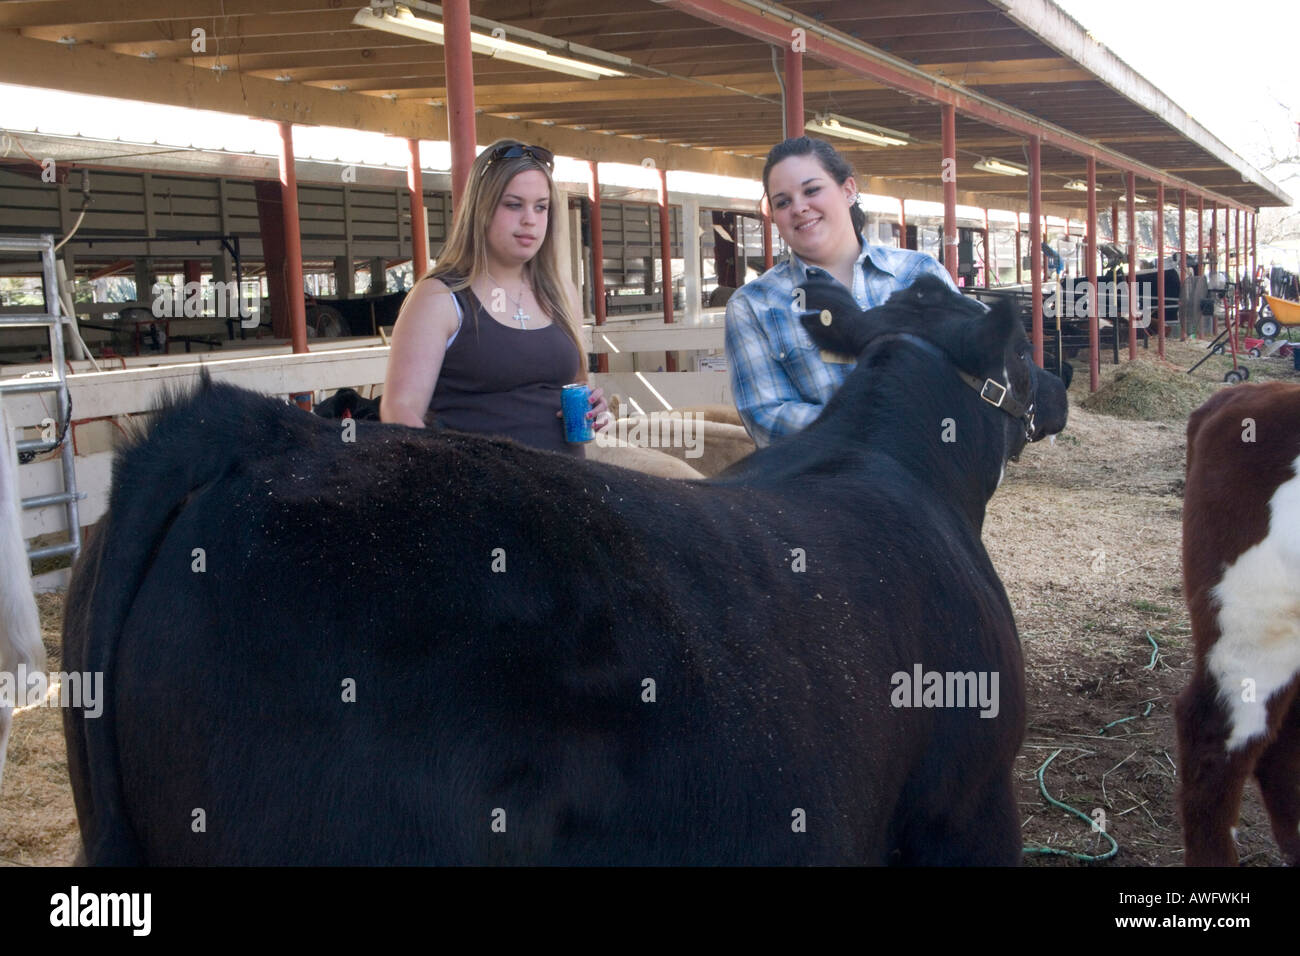 Two young women inspecting steer . Stock Photo